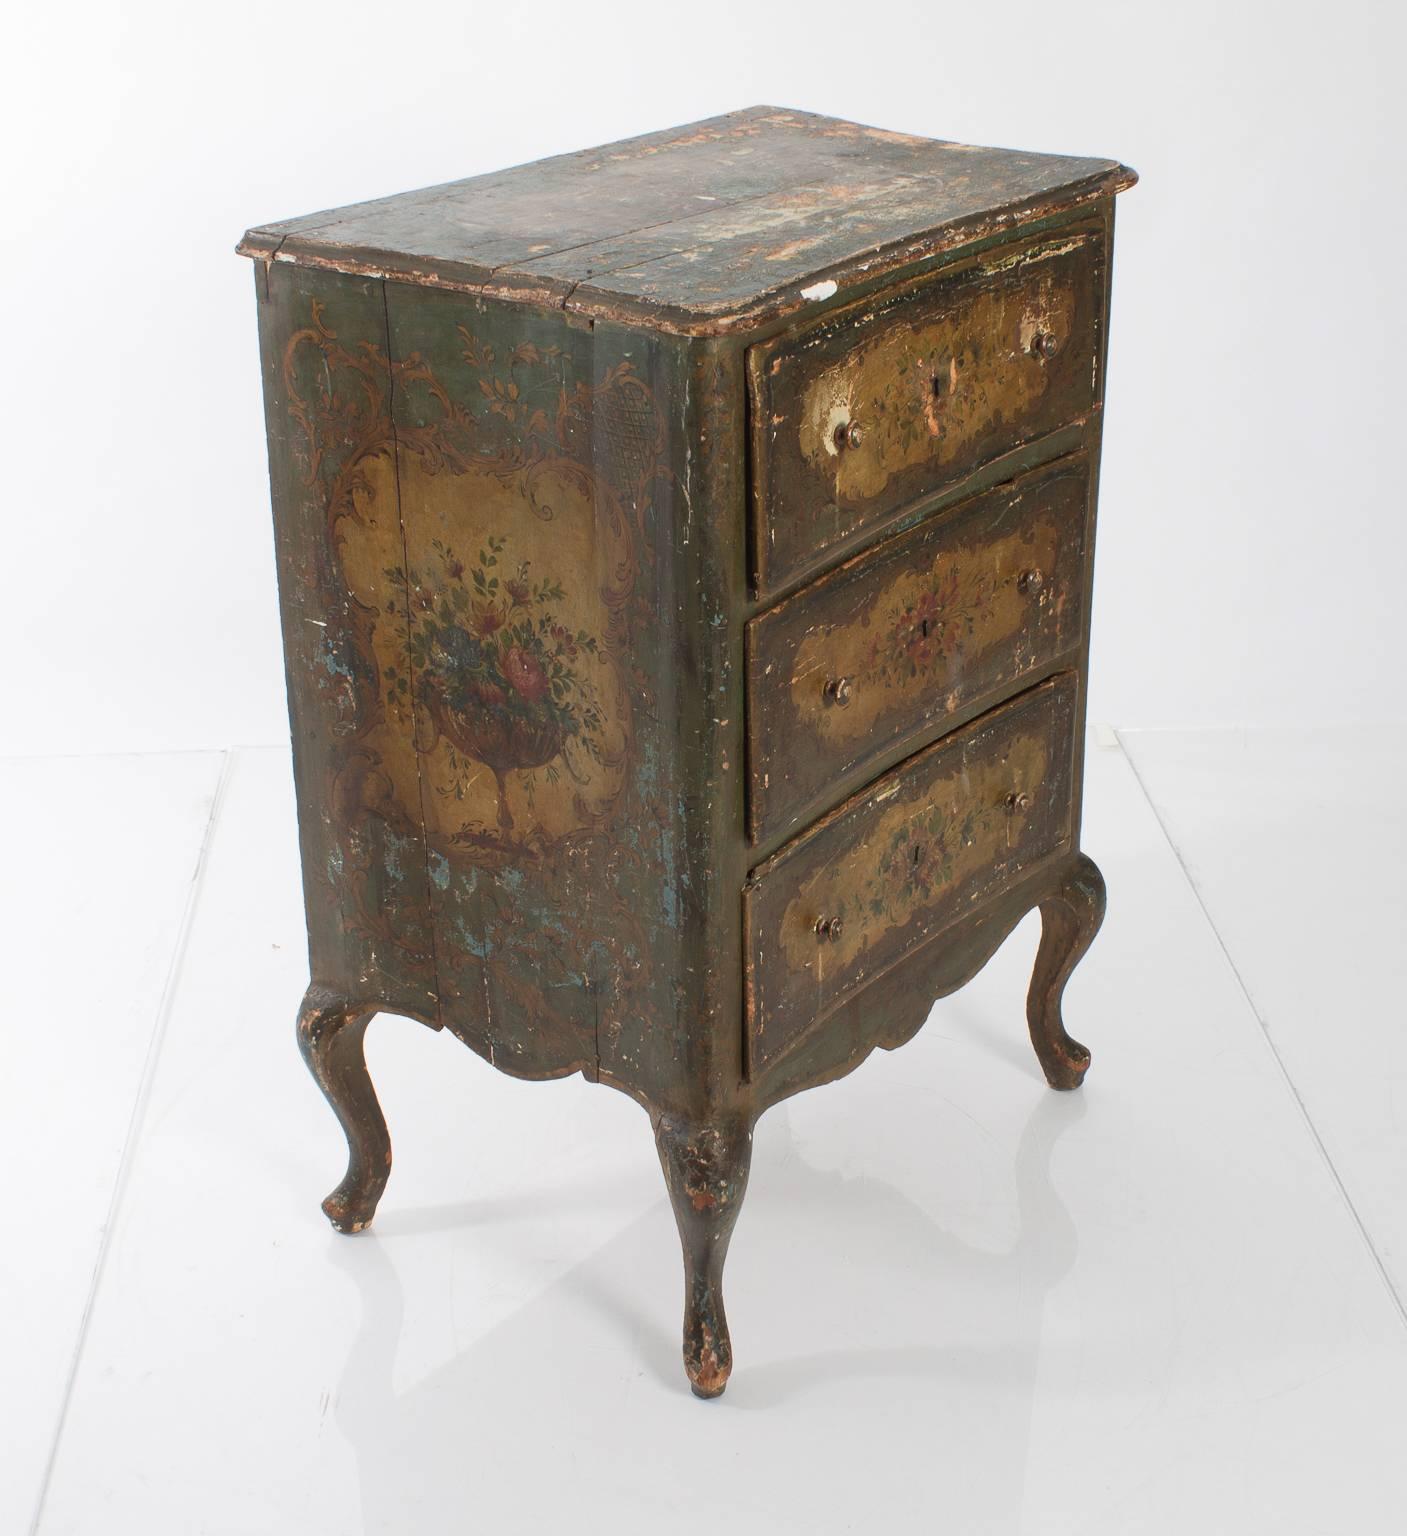 Hand-Painted Vnetian Commode